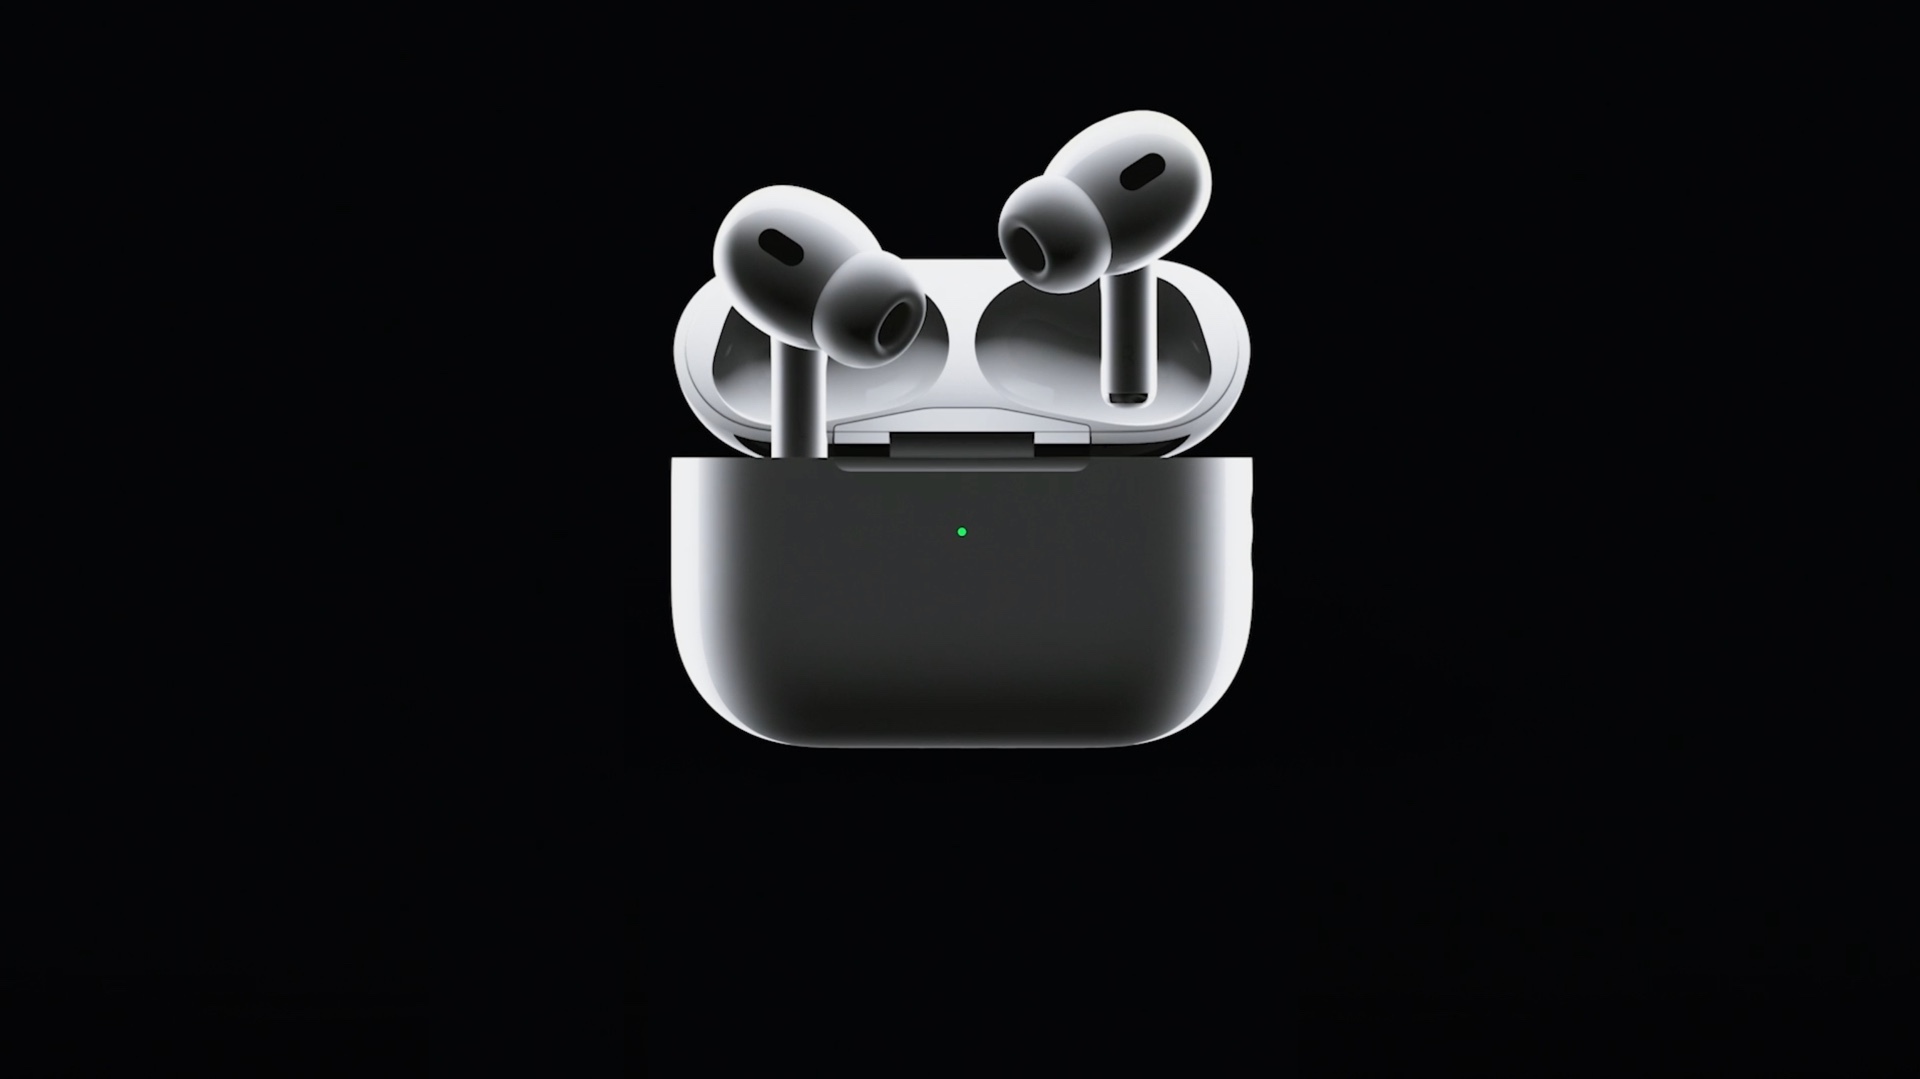 Second-generation AirPods Pro use new H2 chip, enhanced noise 